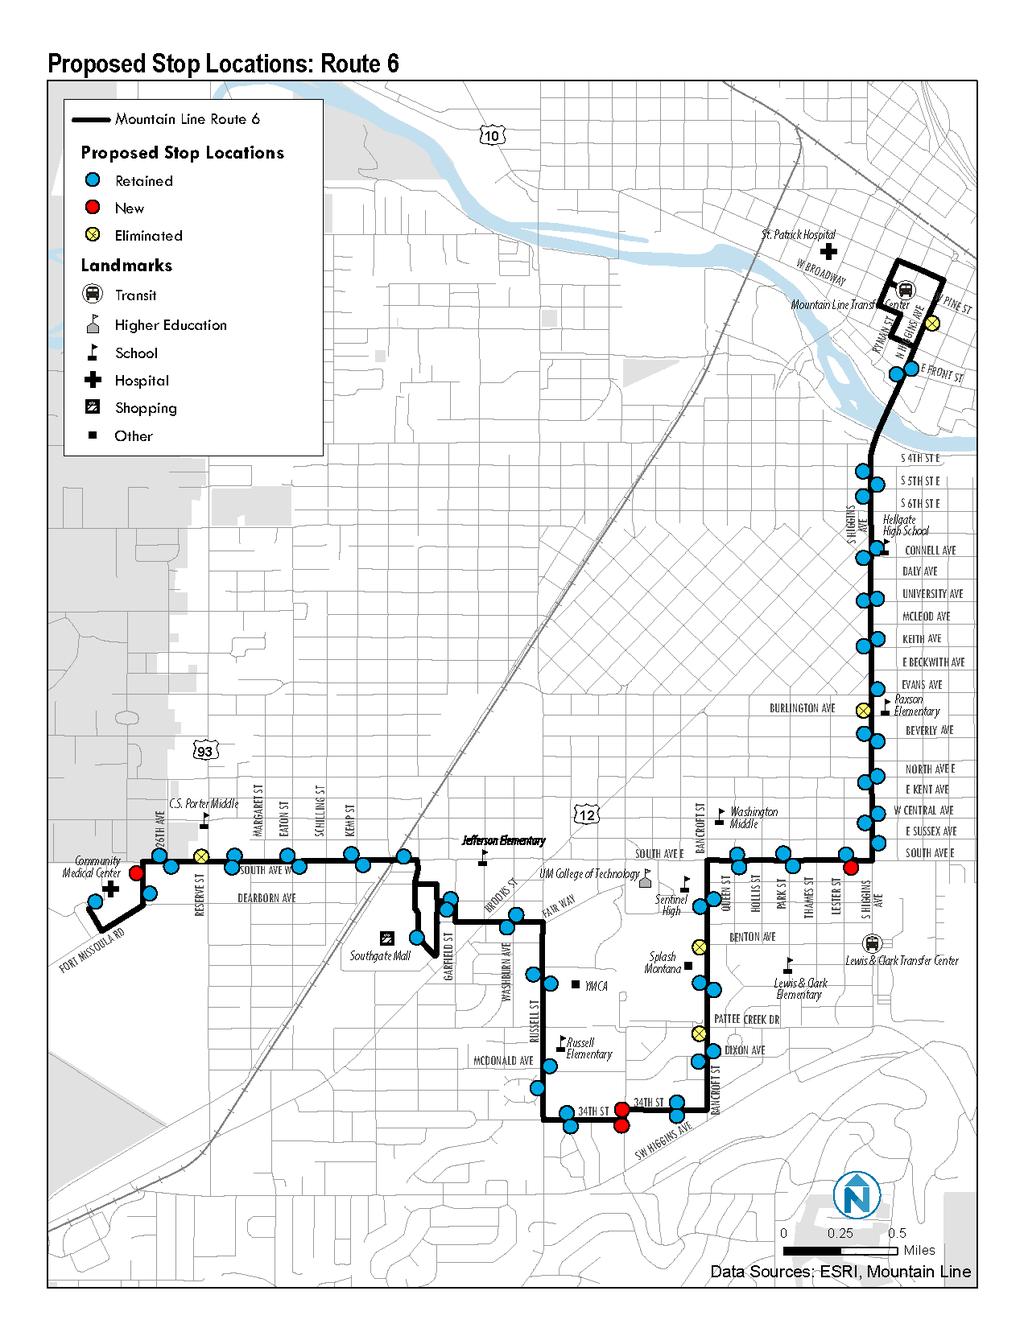 Proposed Stop Changes Route 6